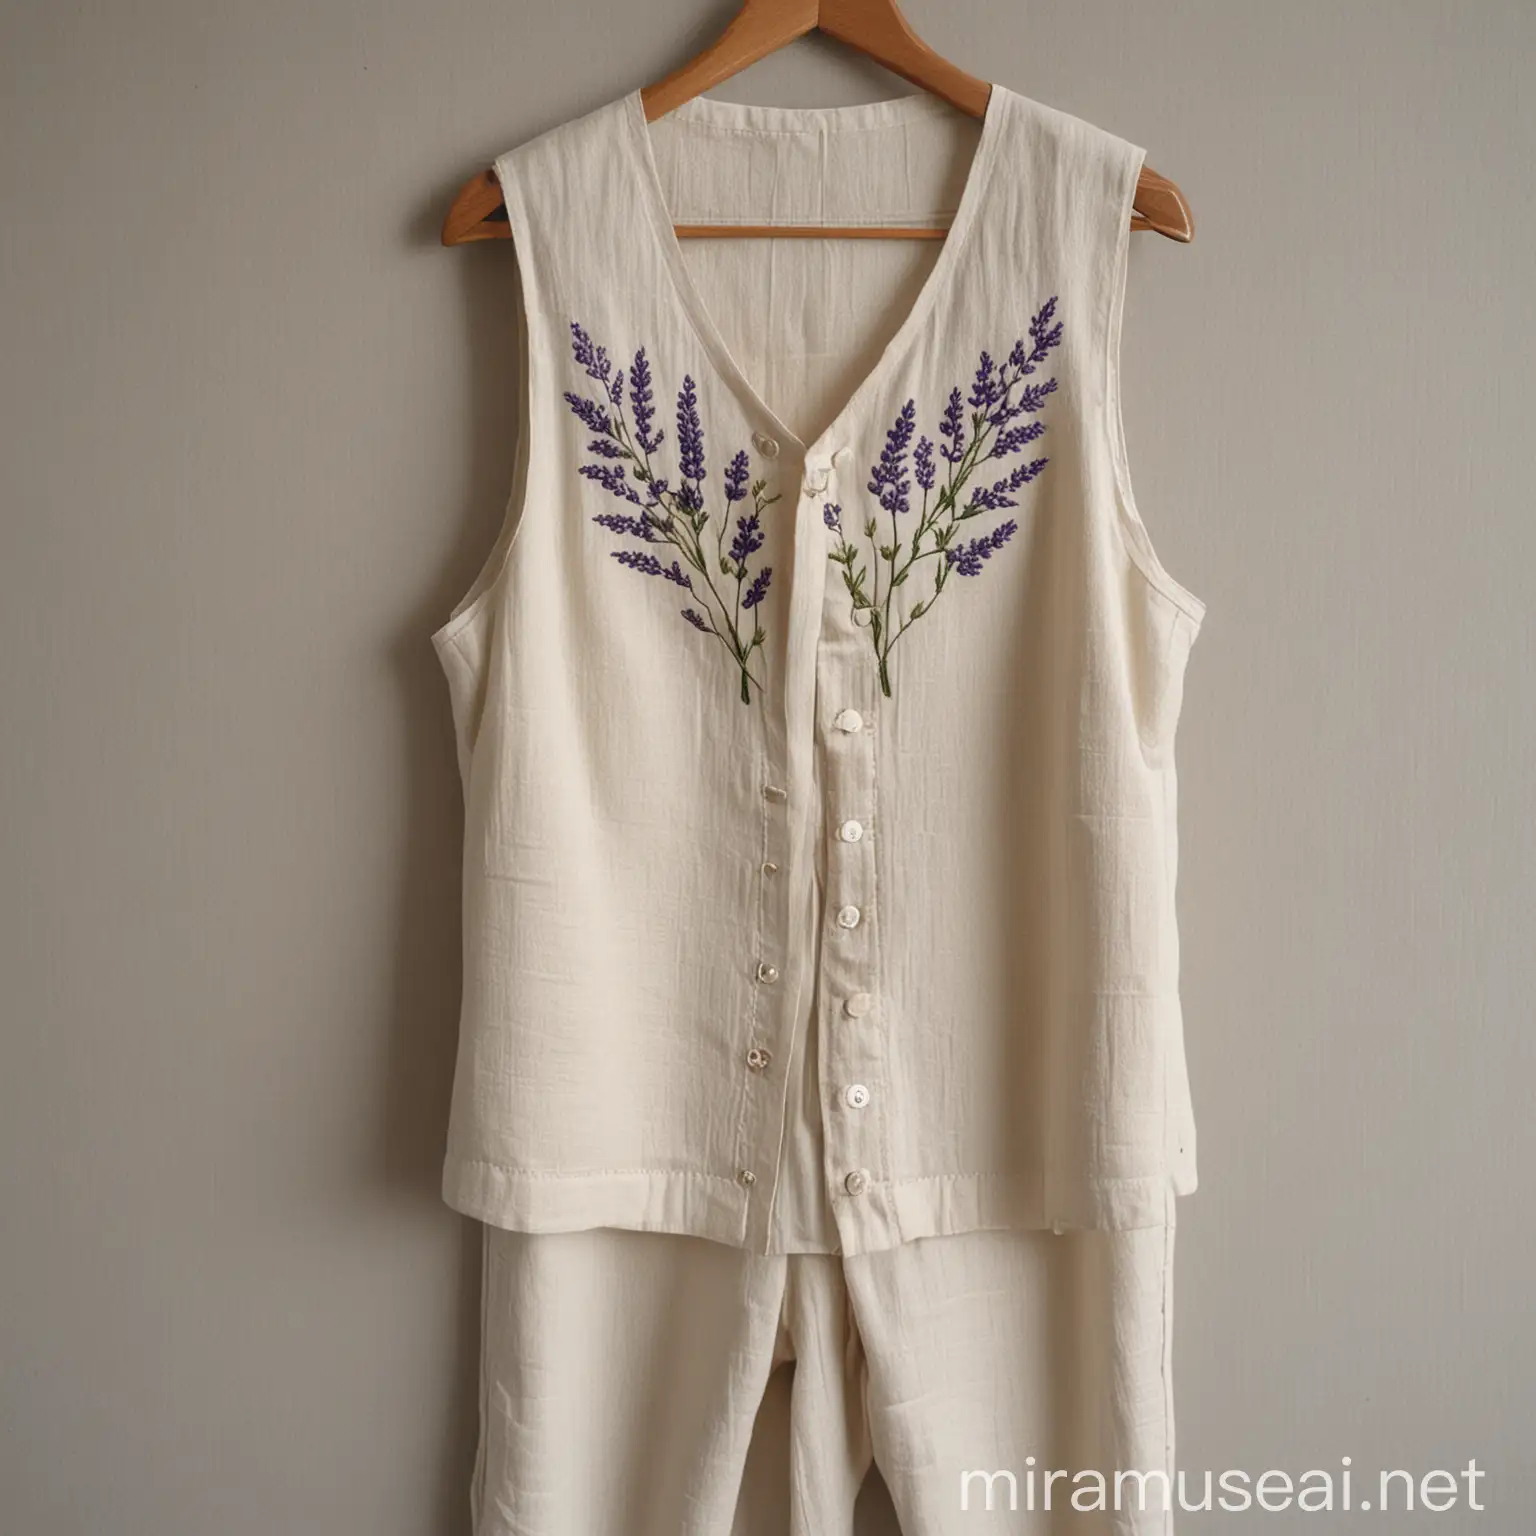 A women's vest, pants, and shirt, worn by a model, cream color, linen, with embroidery, two small, simple and low lavender branches, to be real.

